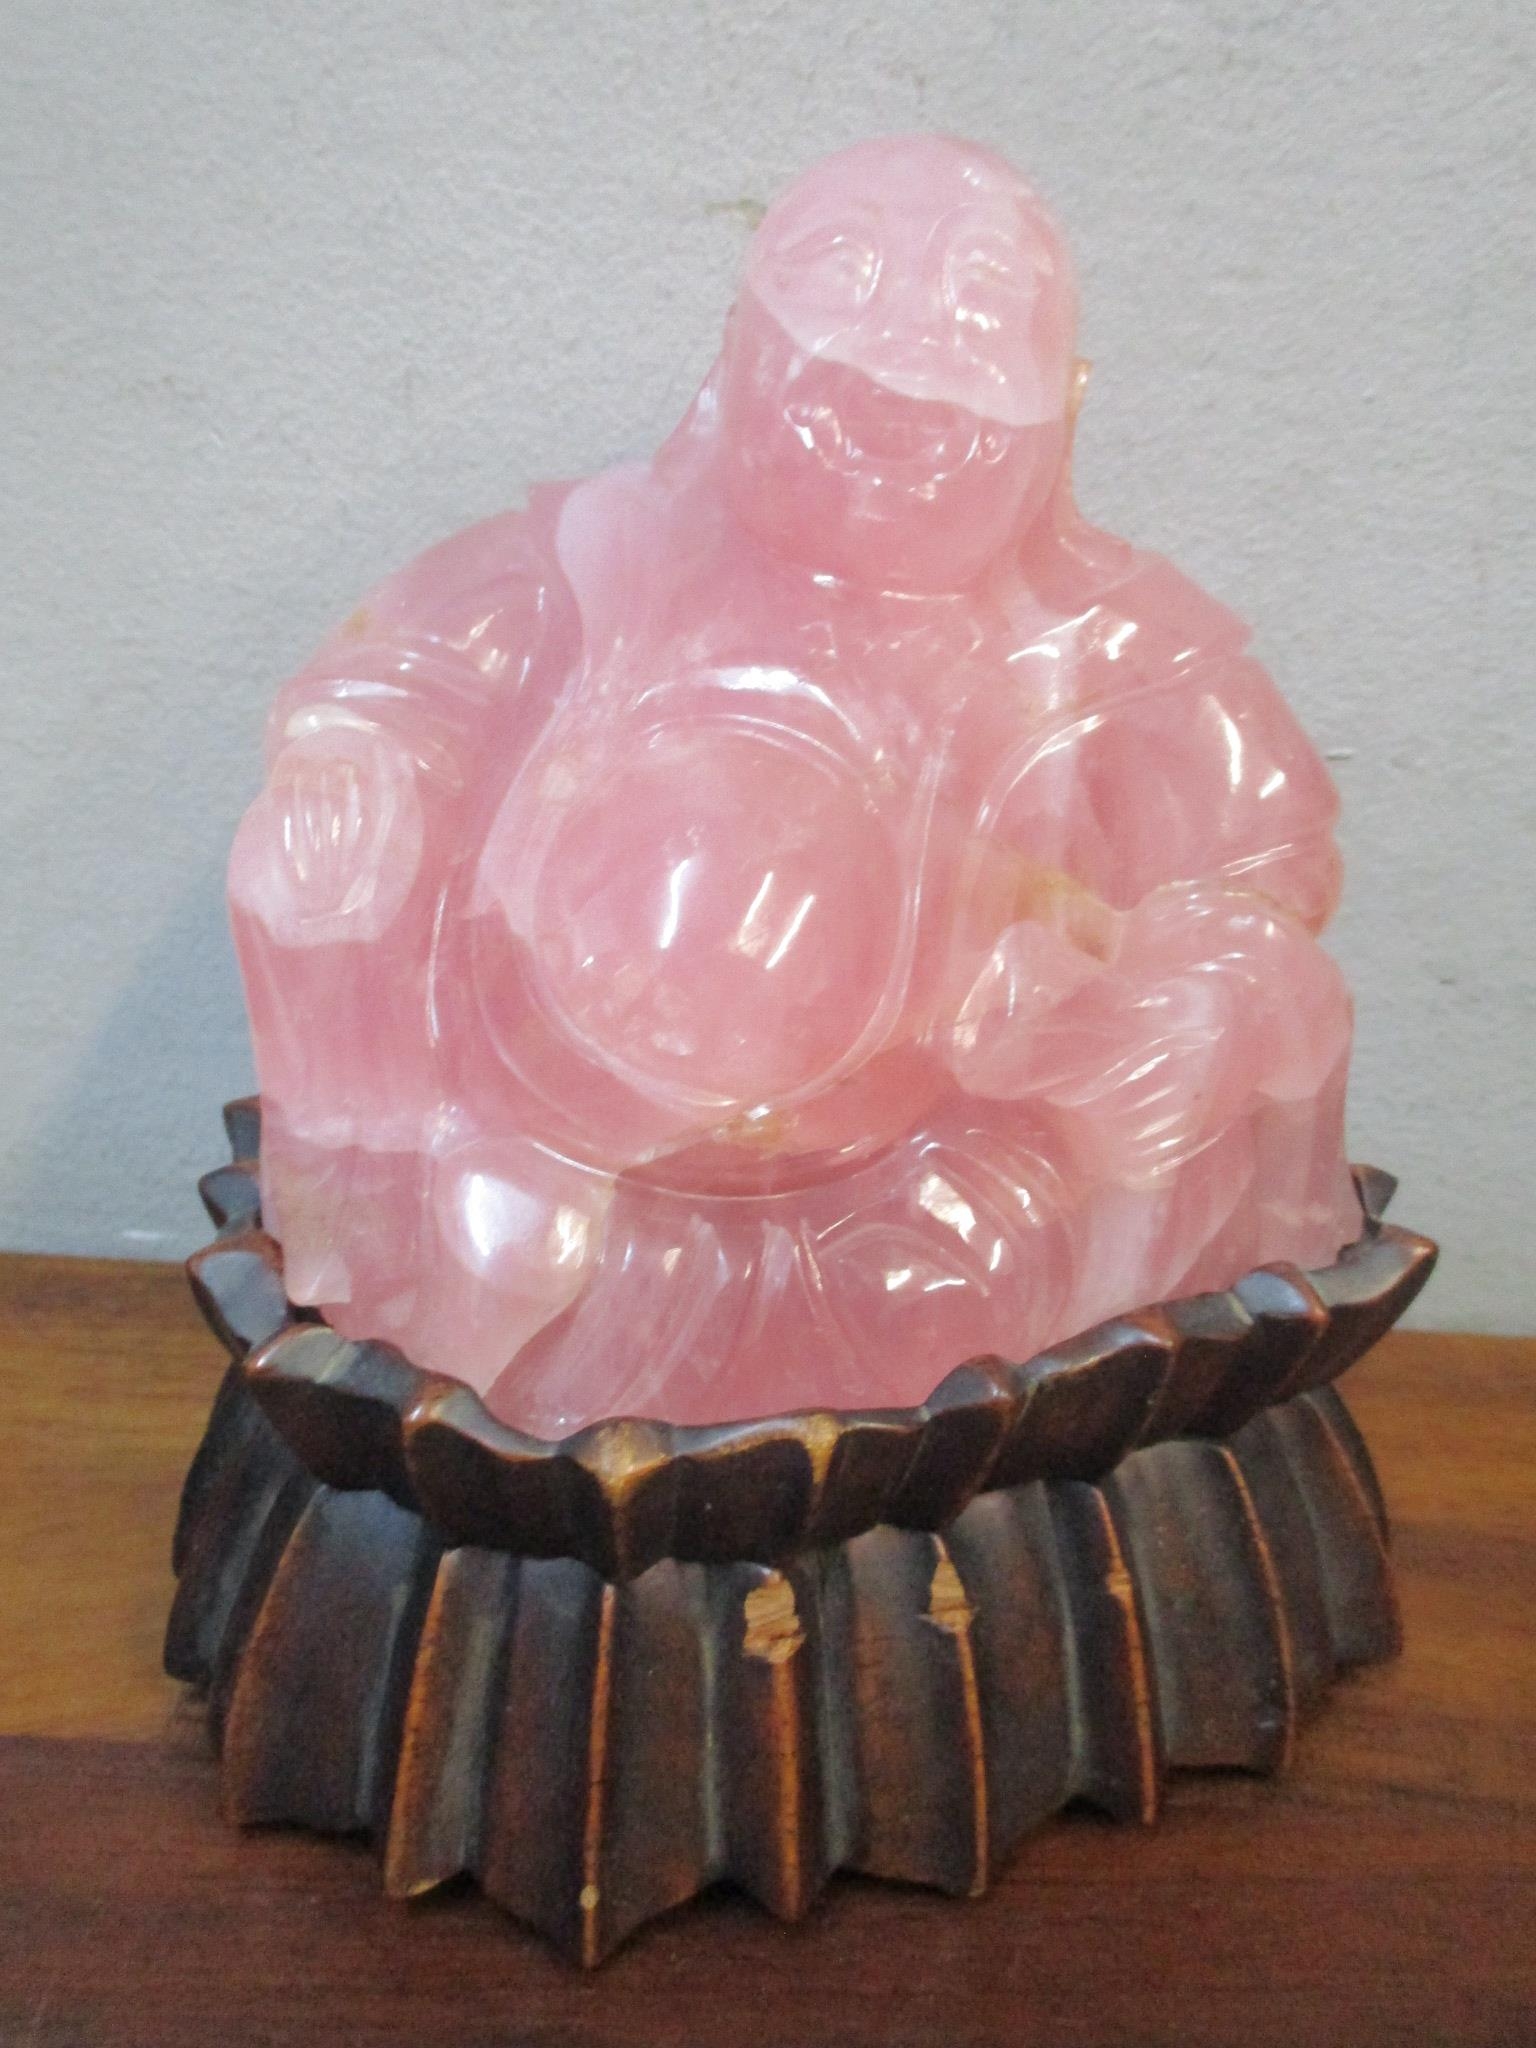 A carved pink stone model Buddha on a carved wooden base Location: